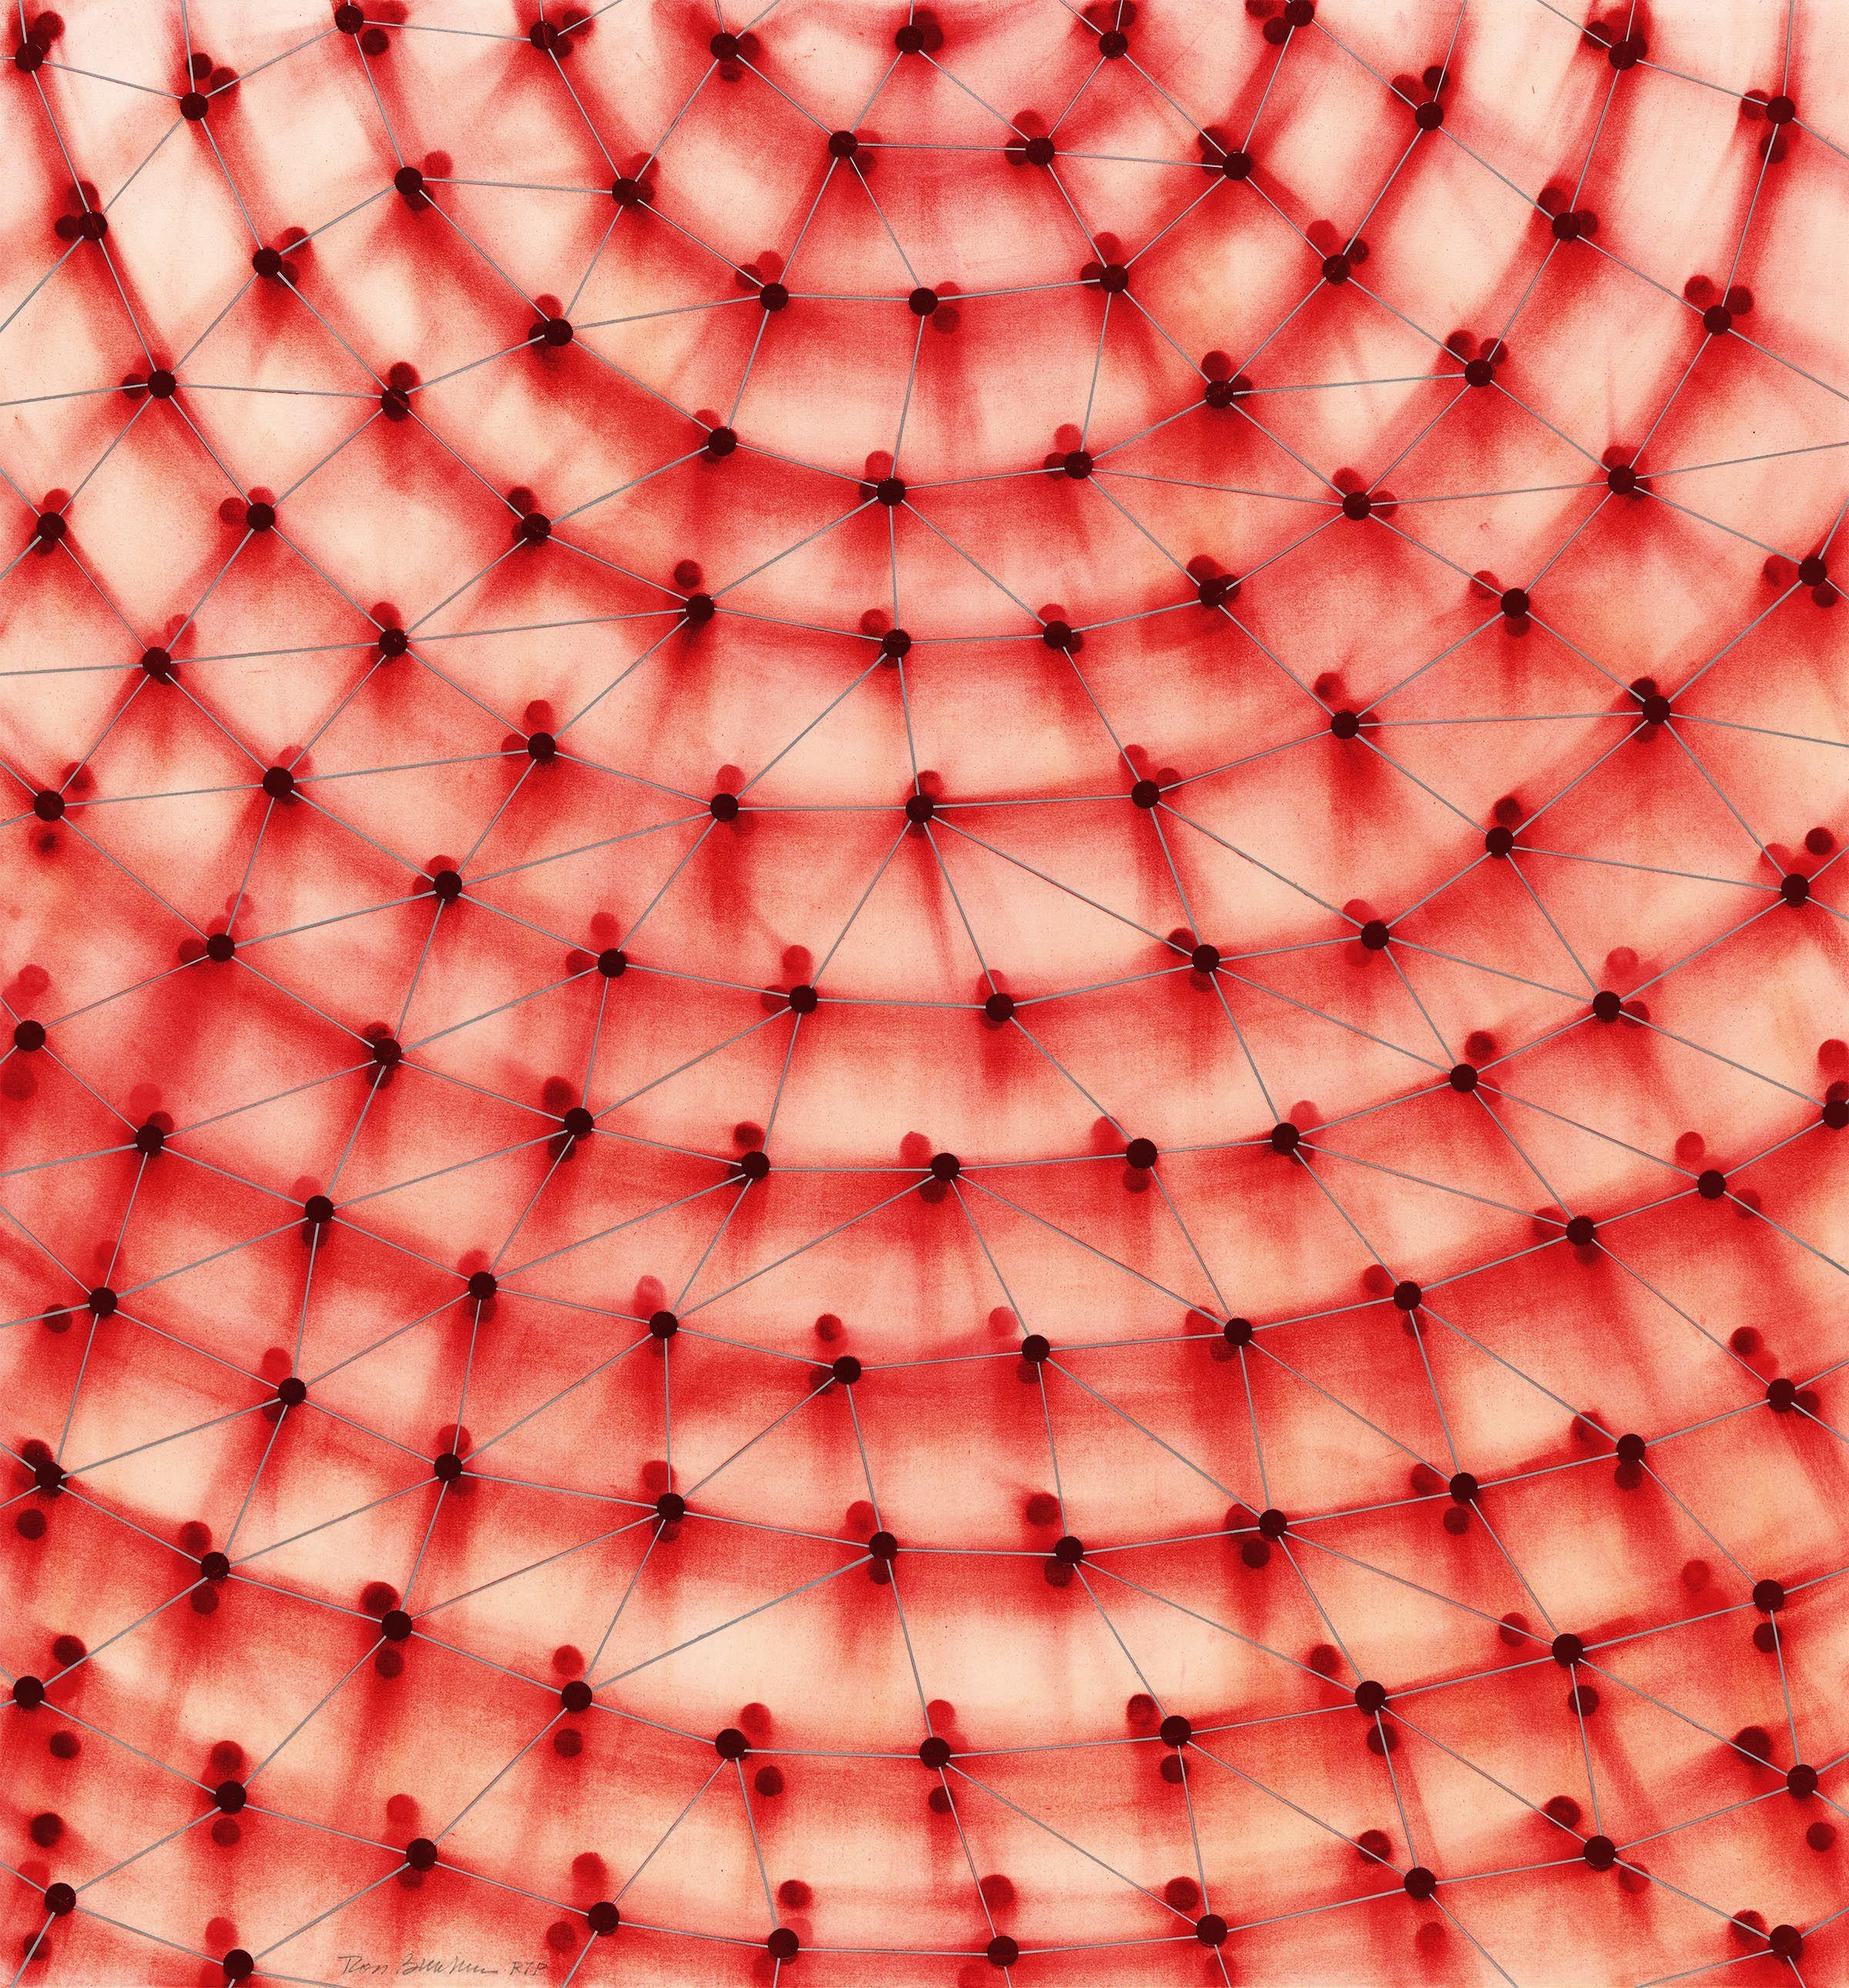 This work by Ross Bleckner, titled "Dome (Red)," is an archival pigment print from 2017. Bleckner's structural and architectural rendering of a reoccurring motif in his body of work shines loudly in this red hued print. His interest in domes, their